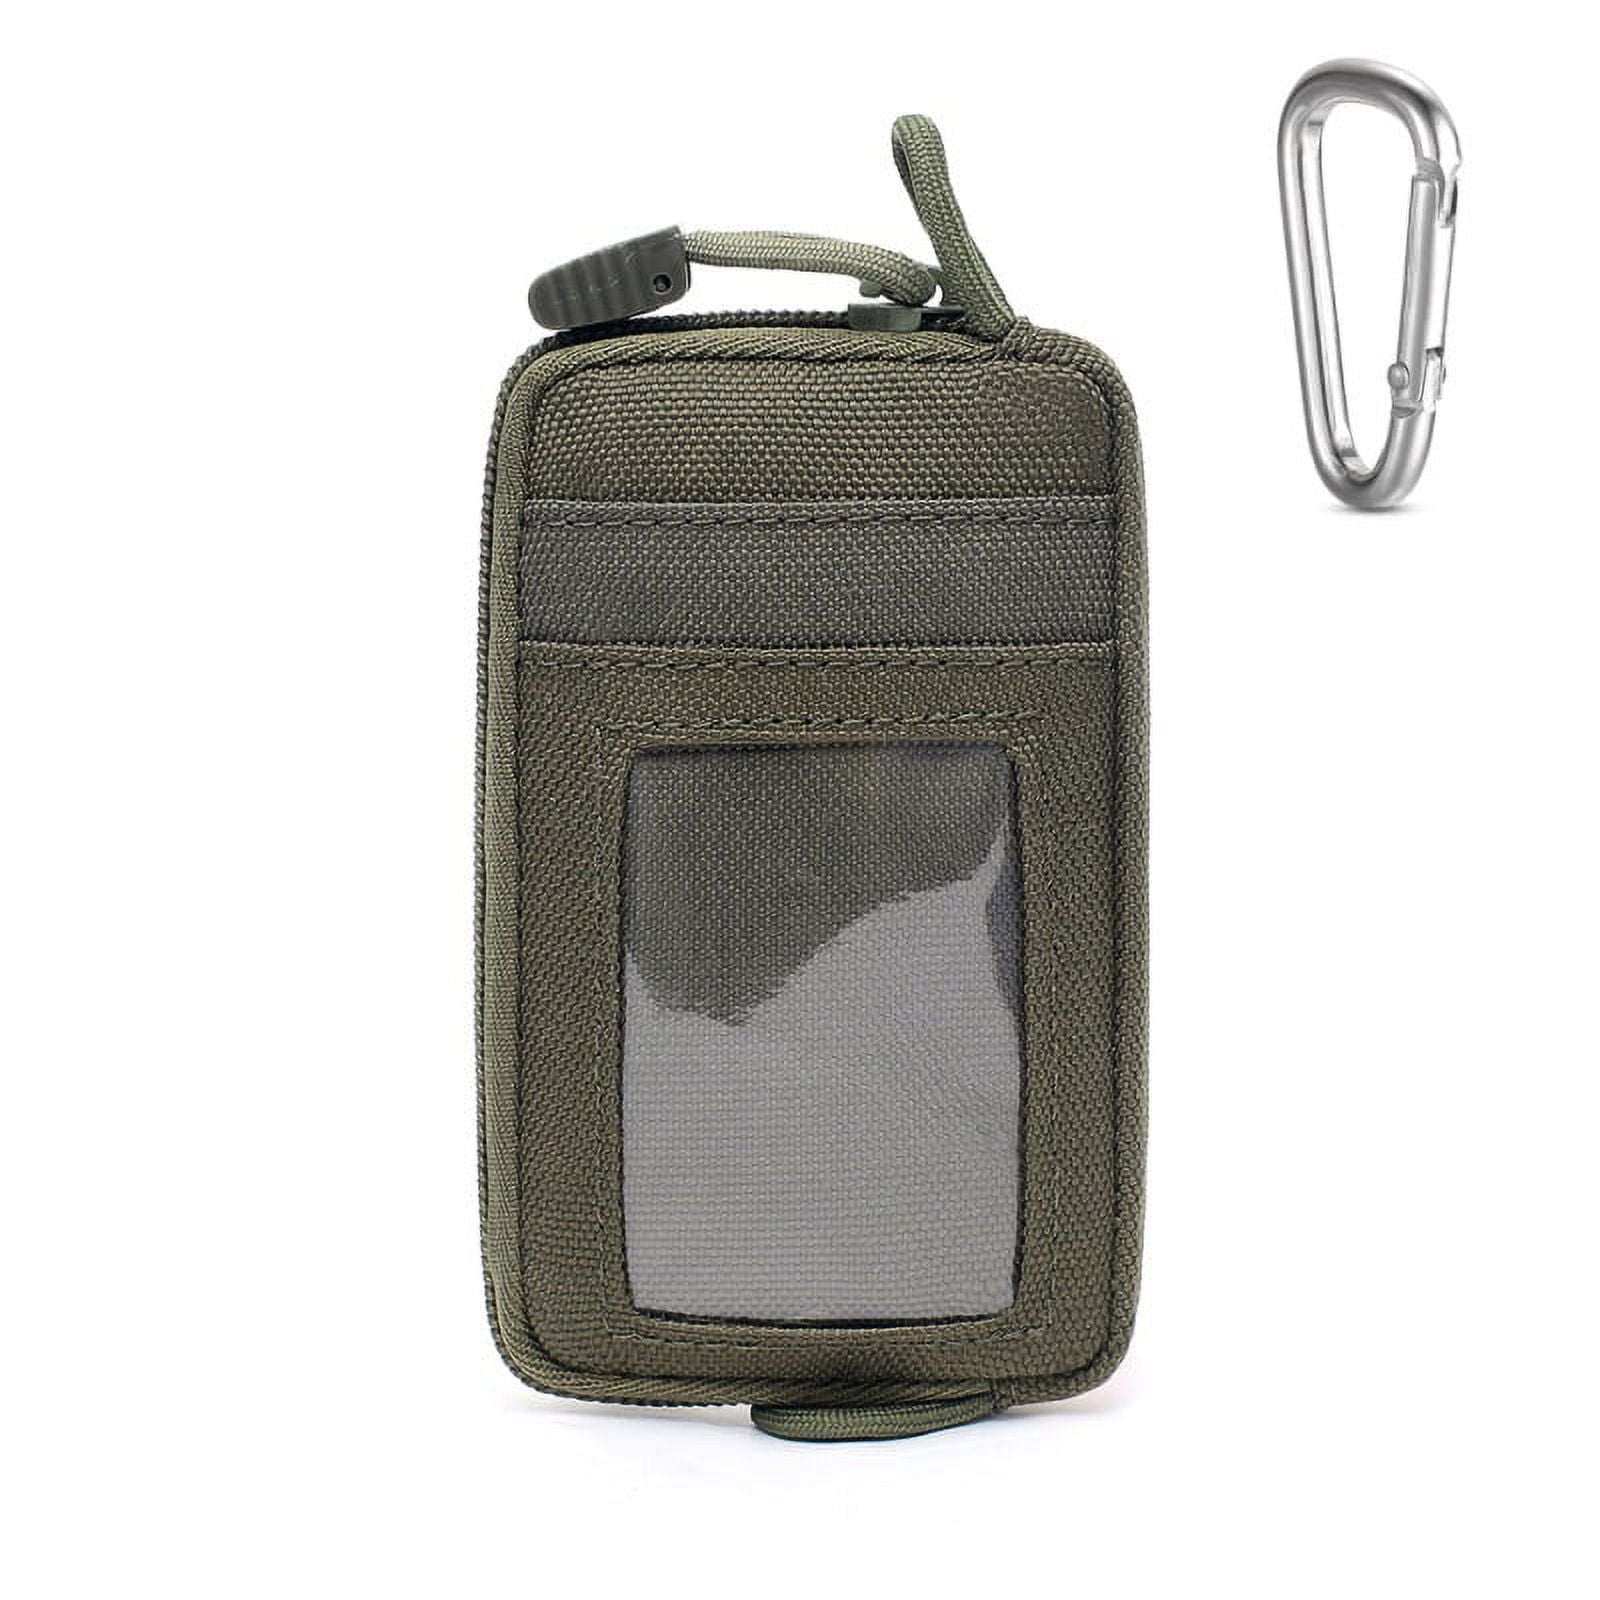 Front Pocket Wallet with Zippers - Small Coin Purse Tactical